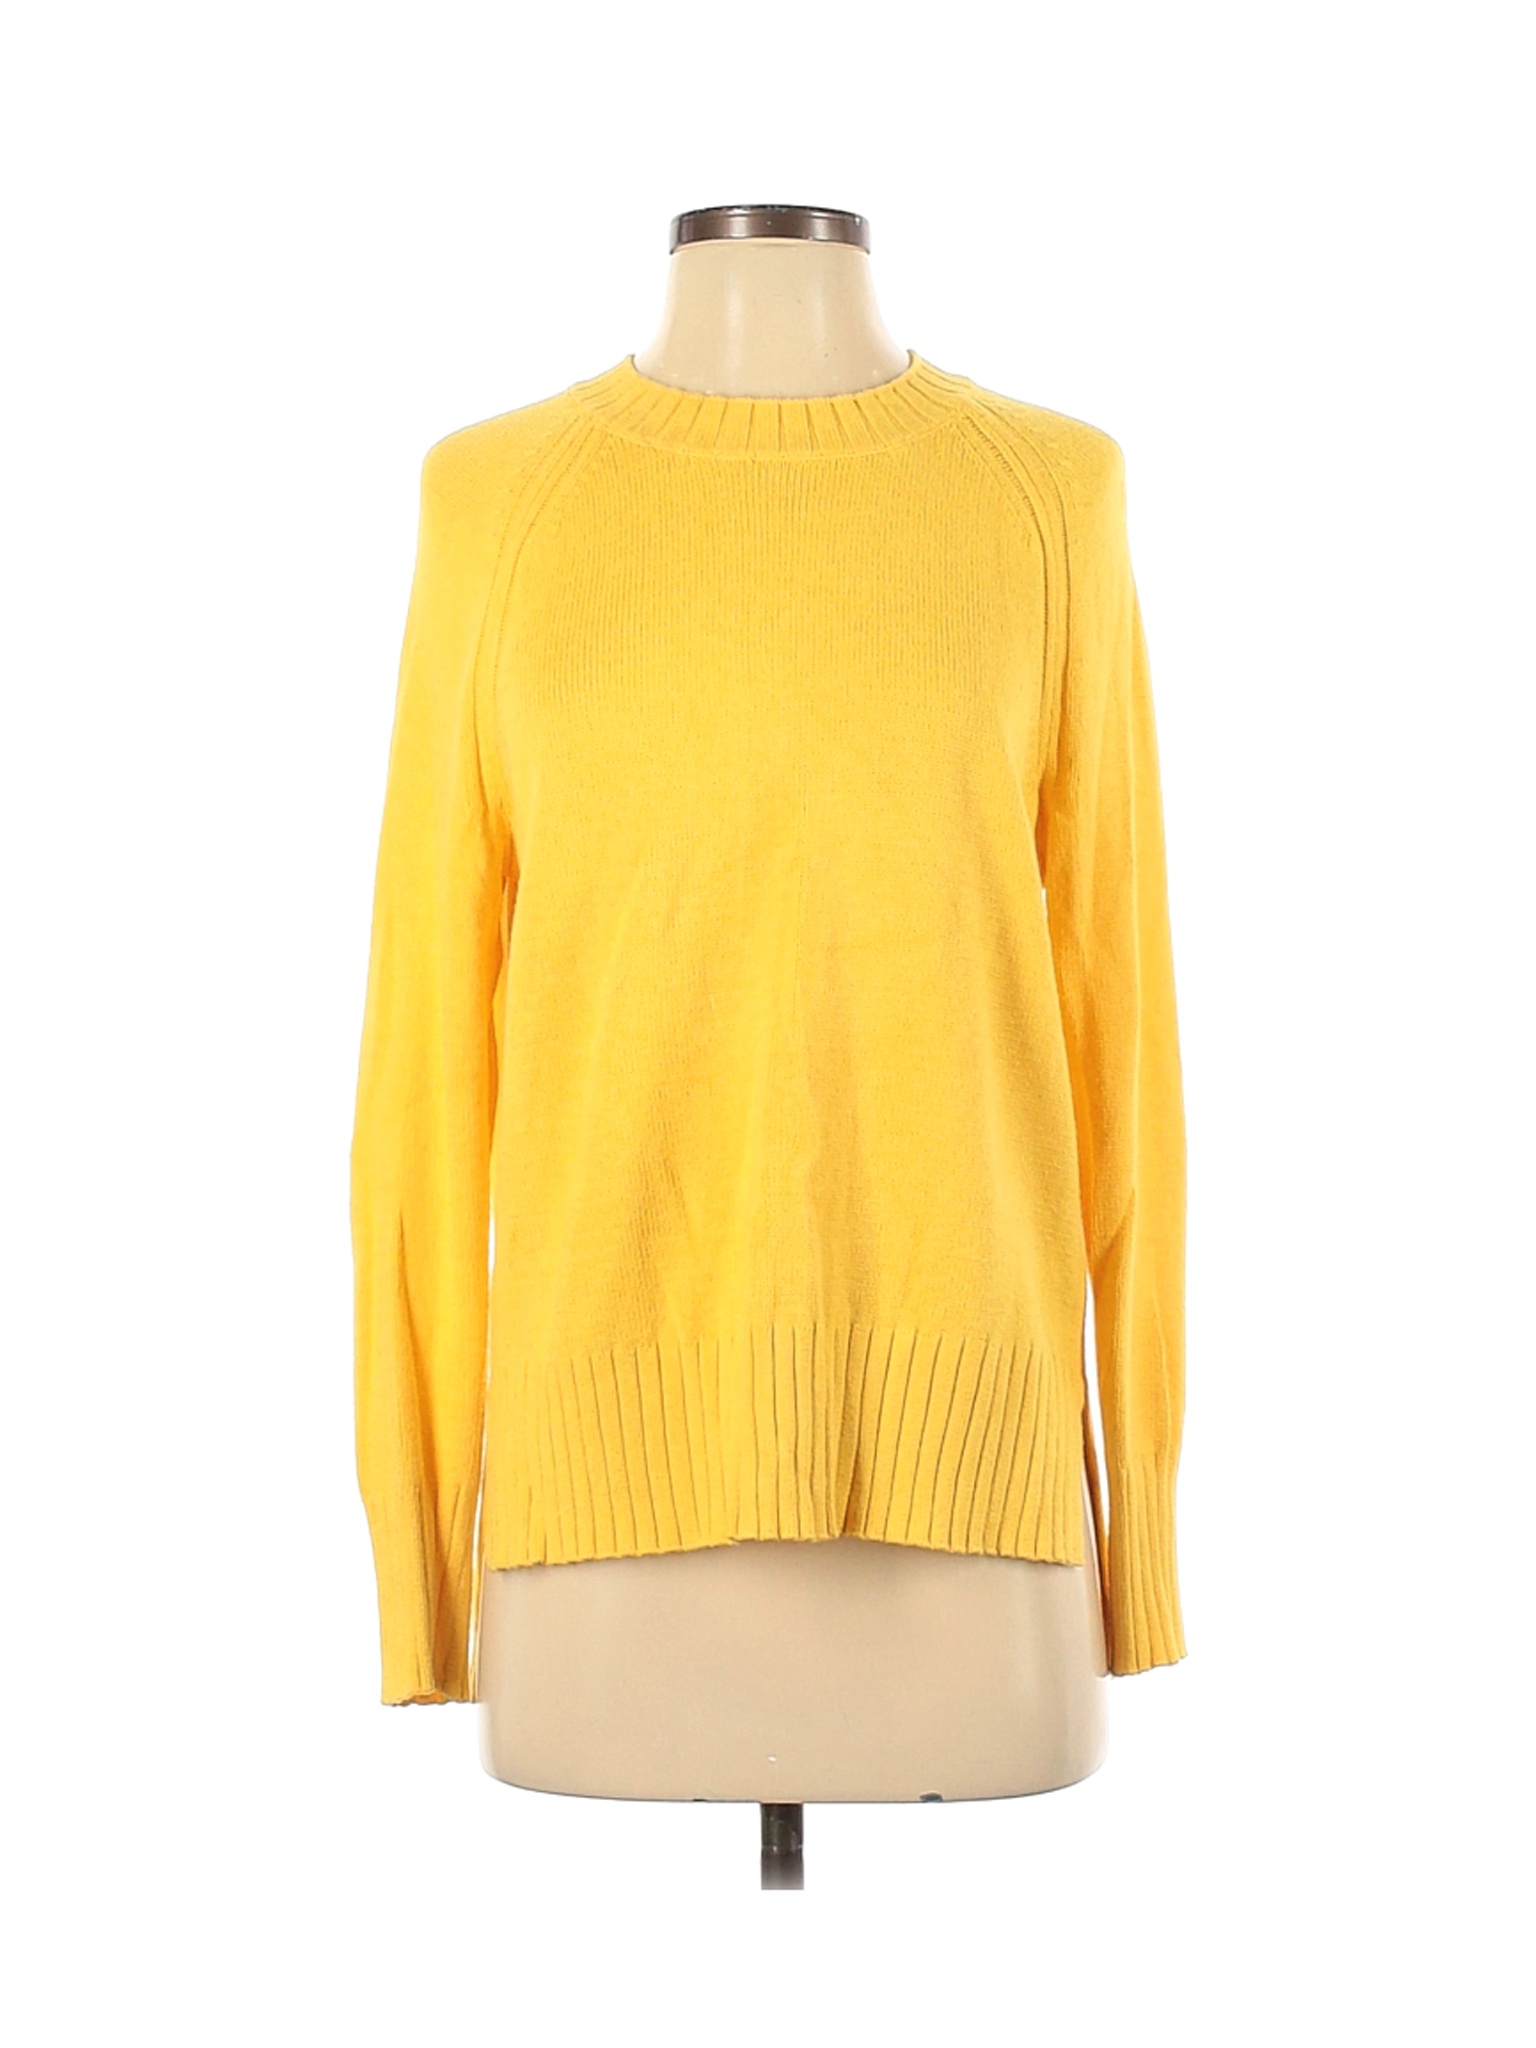 Old Navy Women Yellow Pullover Sweater XS | eBay